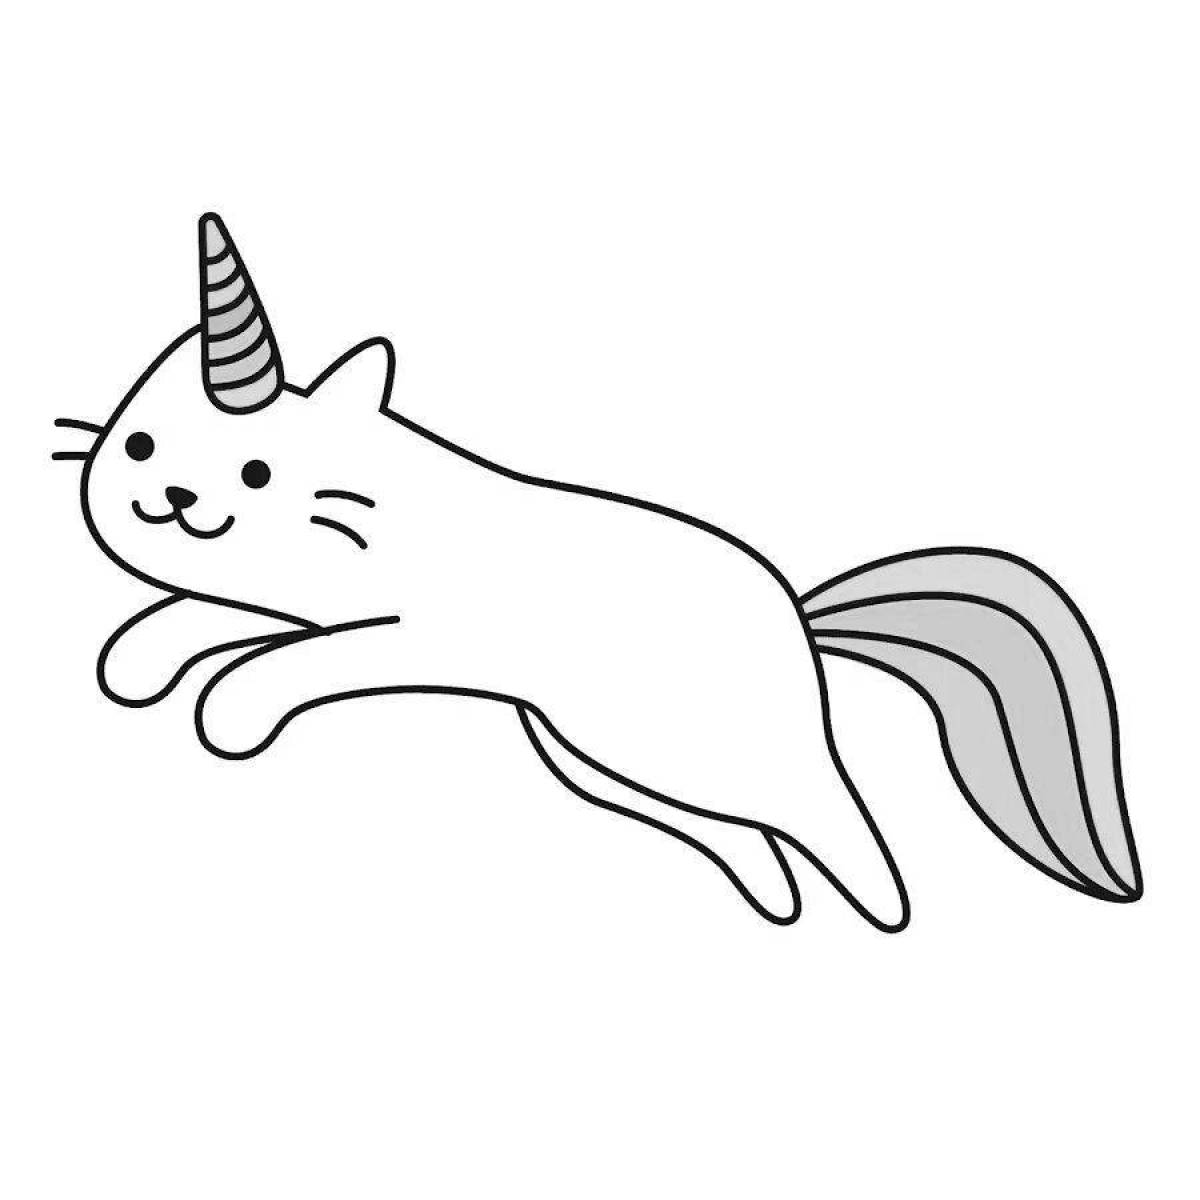 Adorable rainbow cat unicorn coloring page